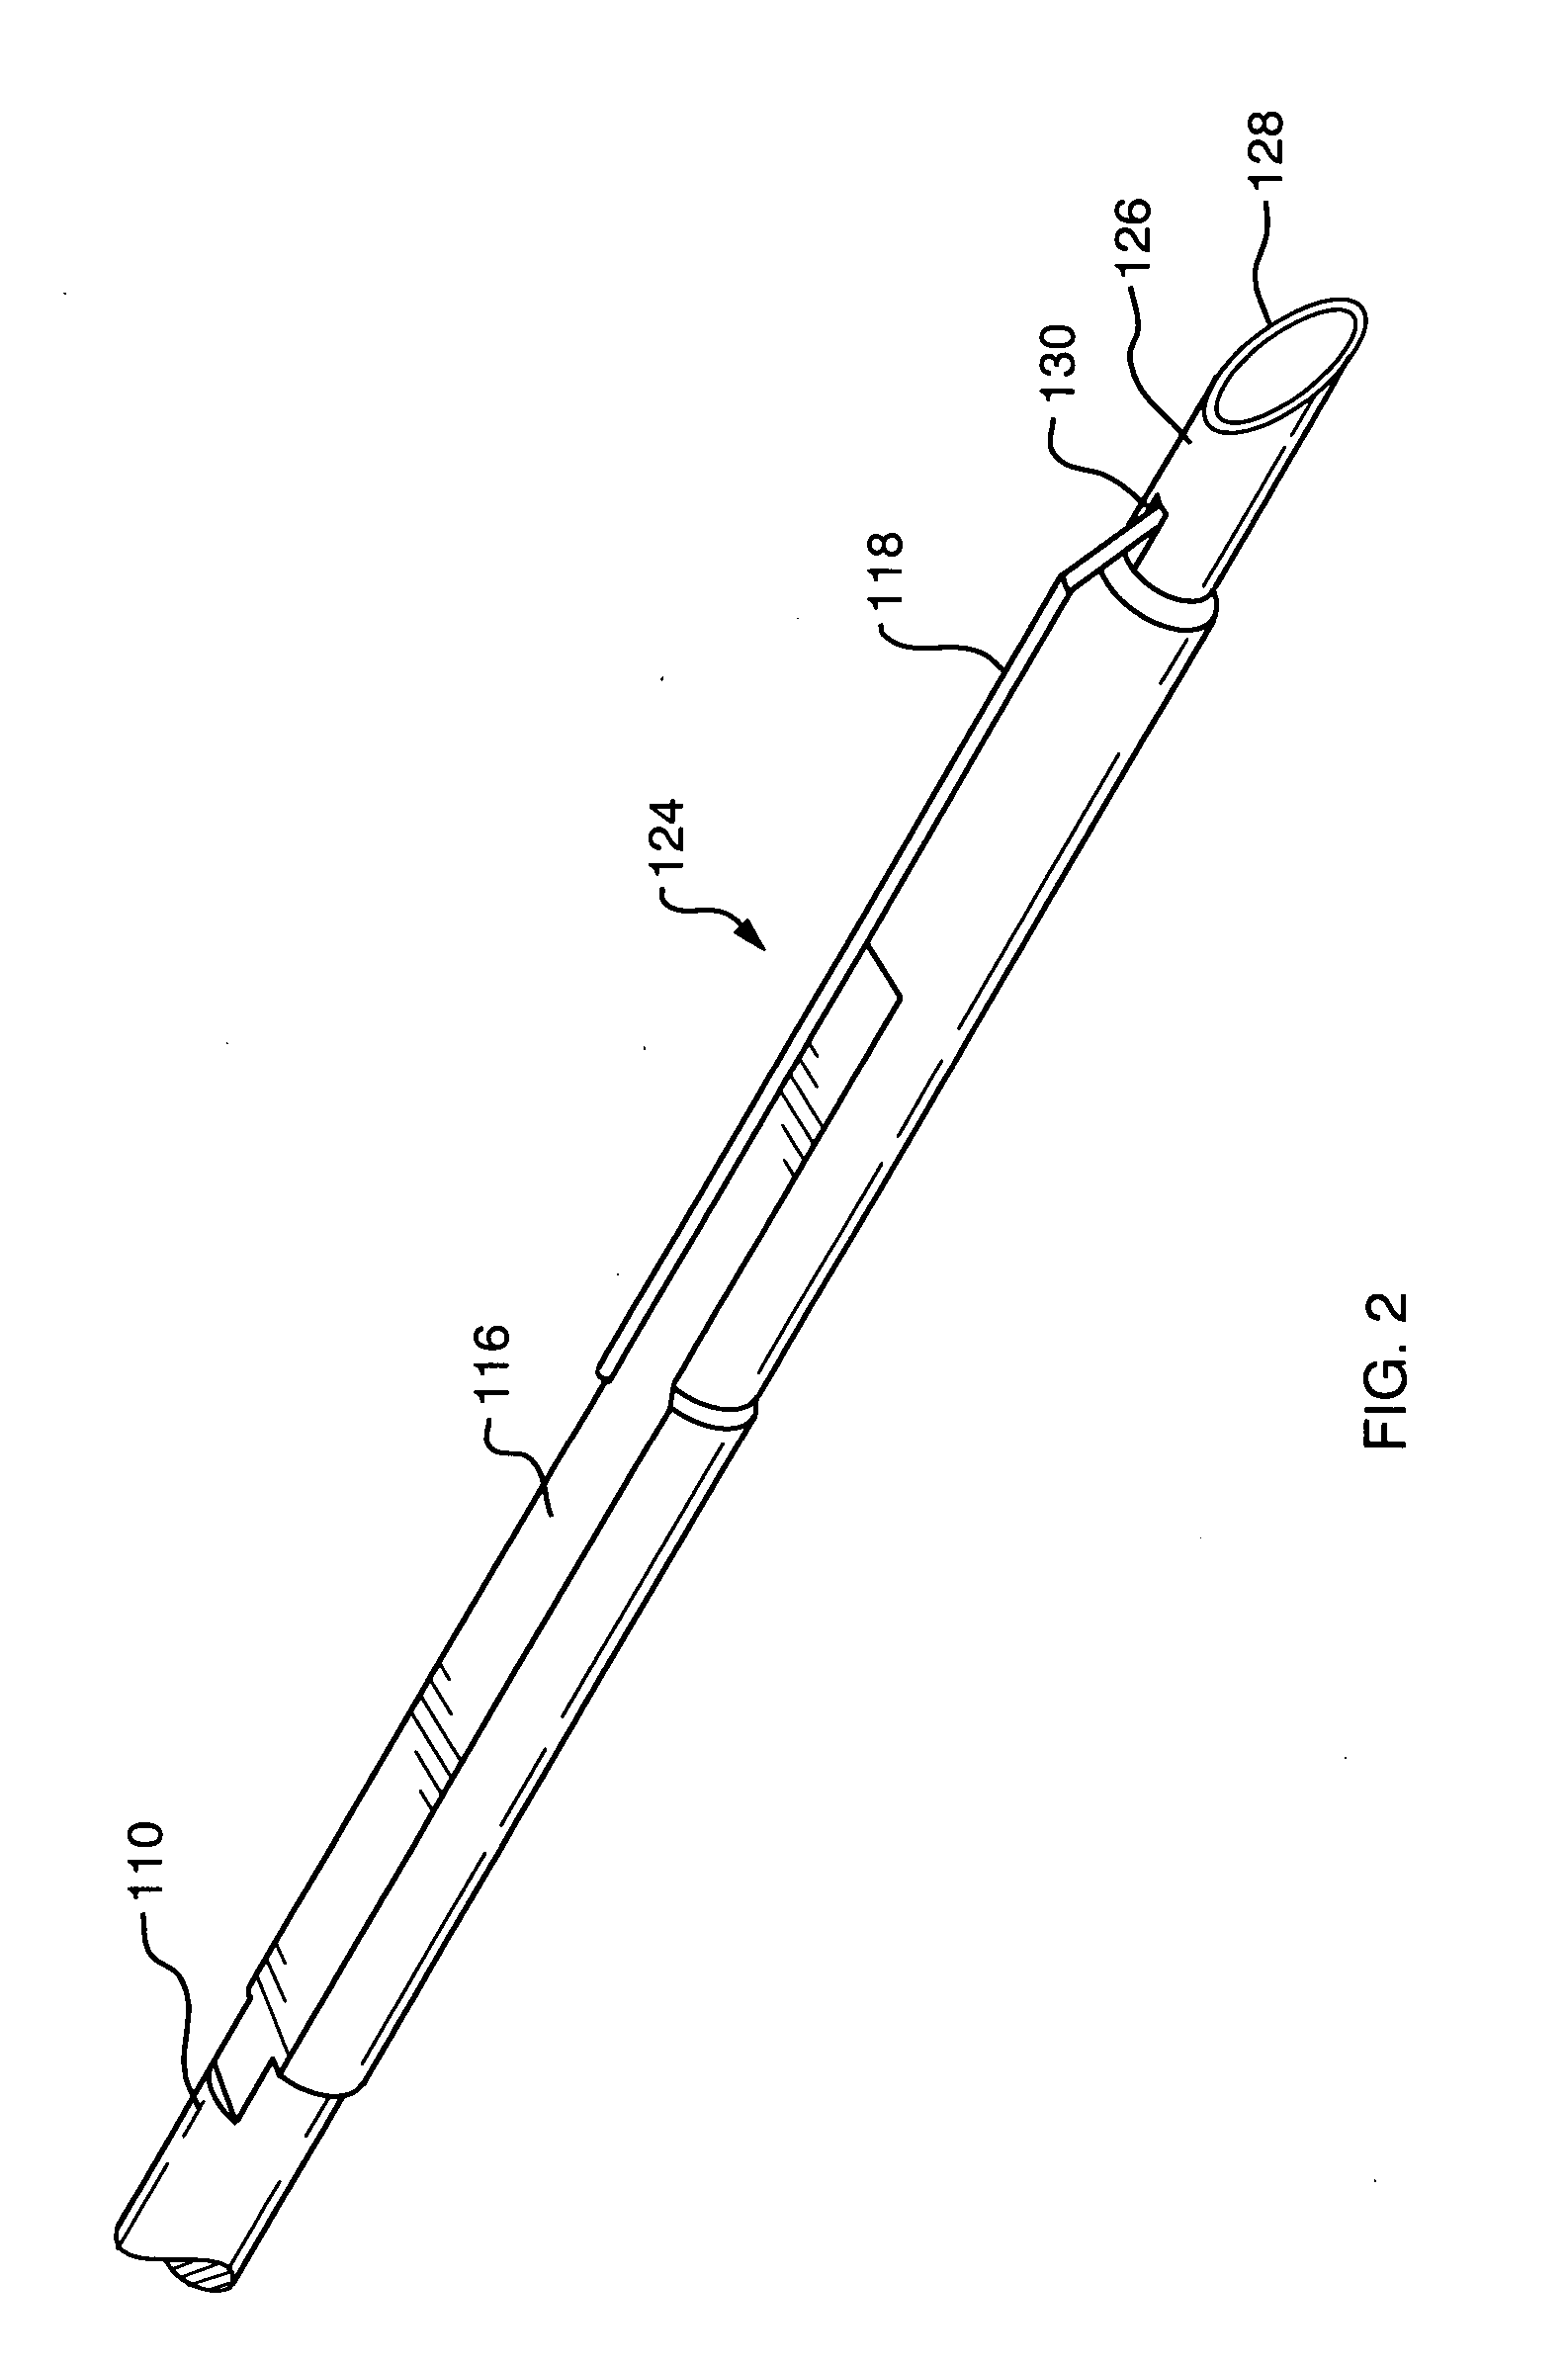 Tissue capturing and suturing device and method